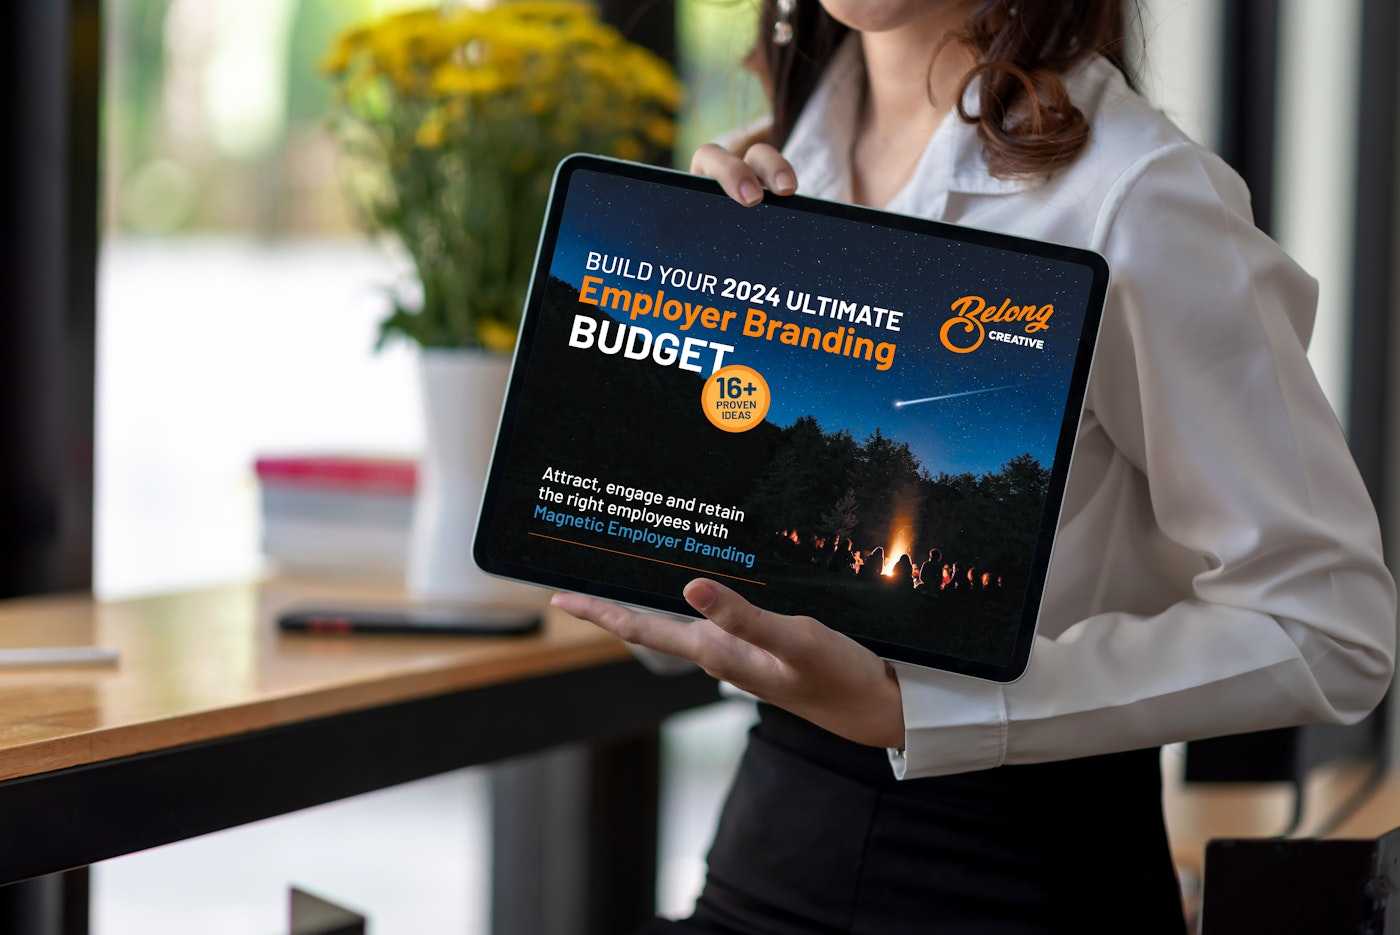 Woman holding ipad with Employer Brand ultimate budget ebook